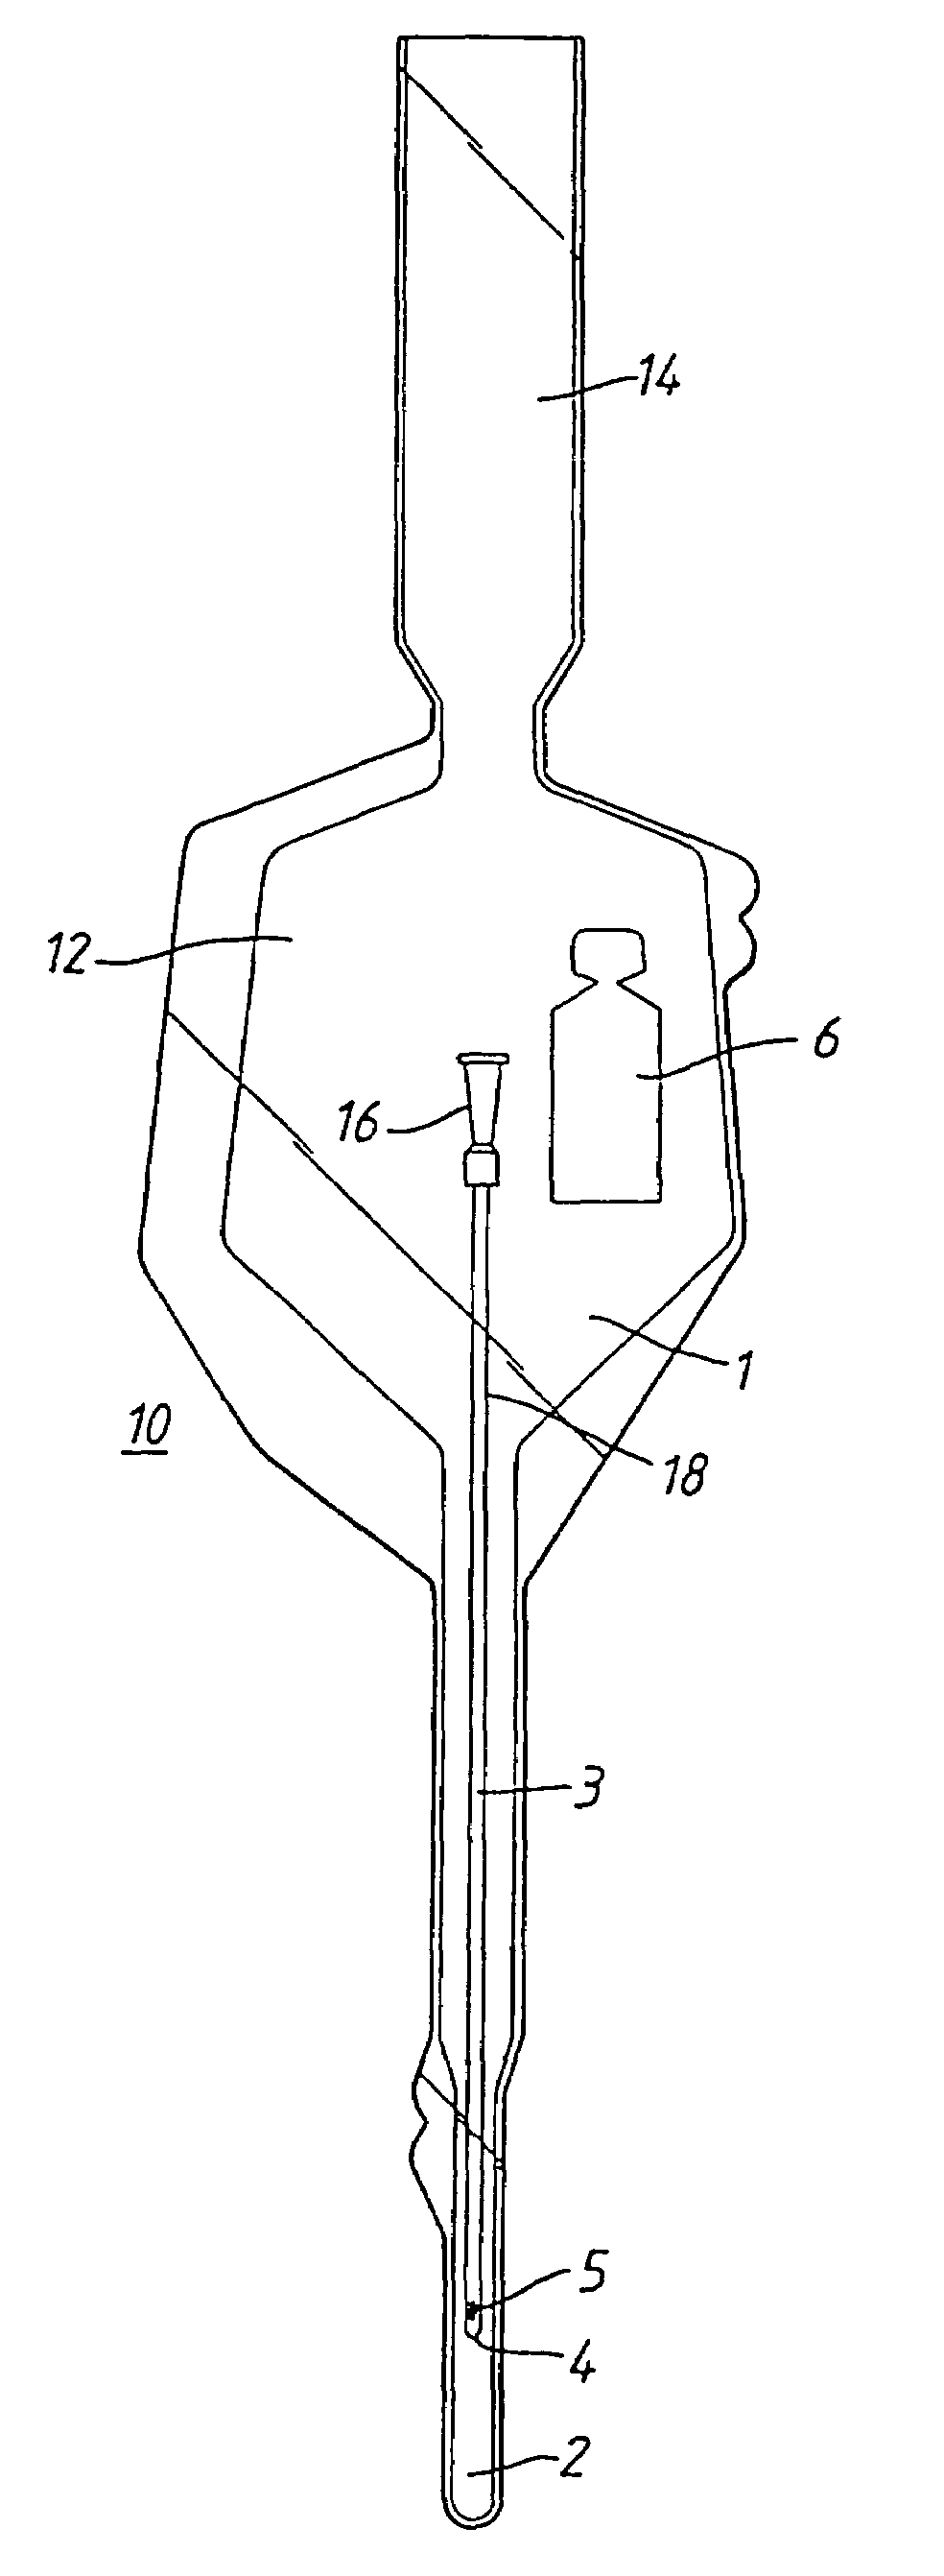 Hydrophilic urinary catheter having a water-containing sachet